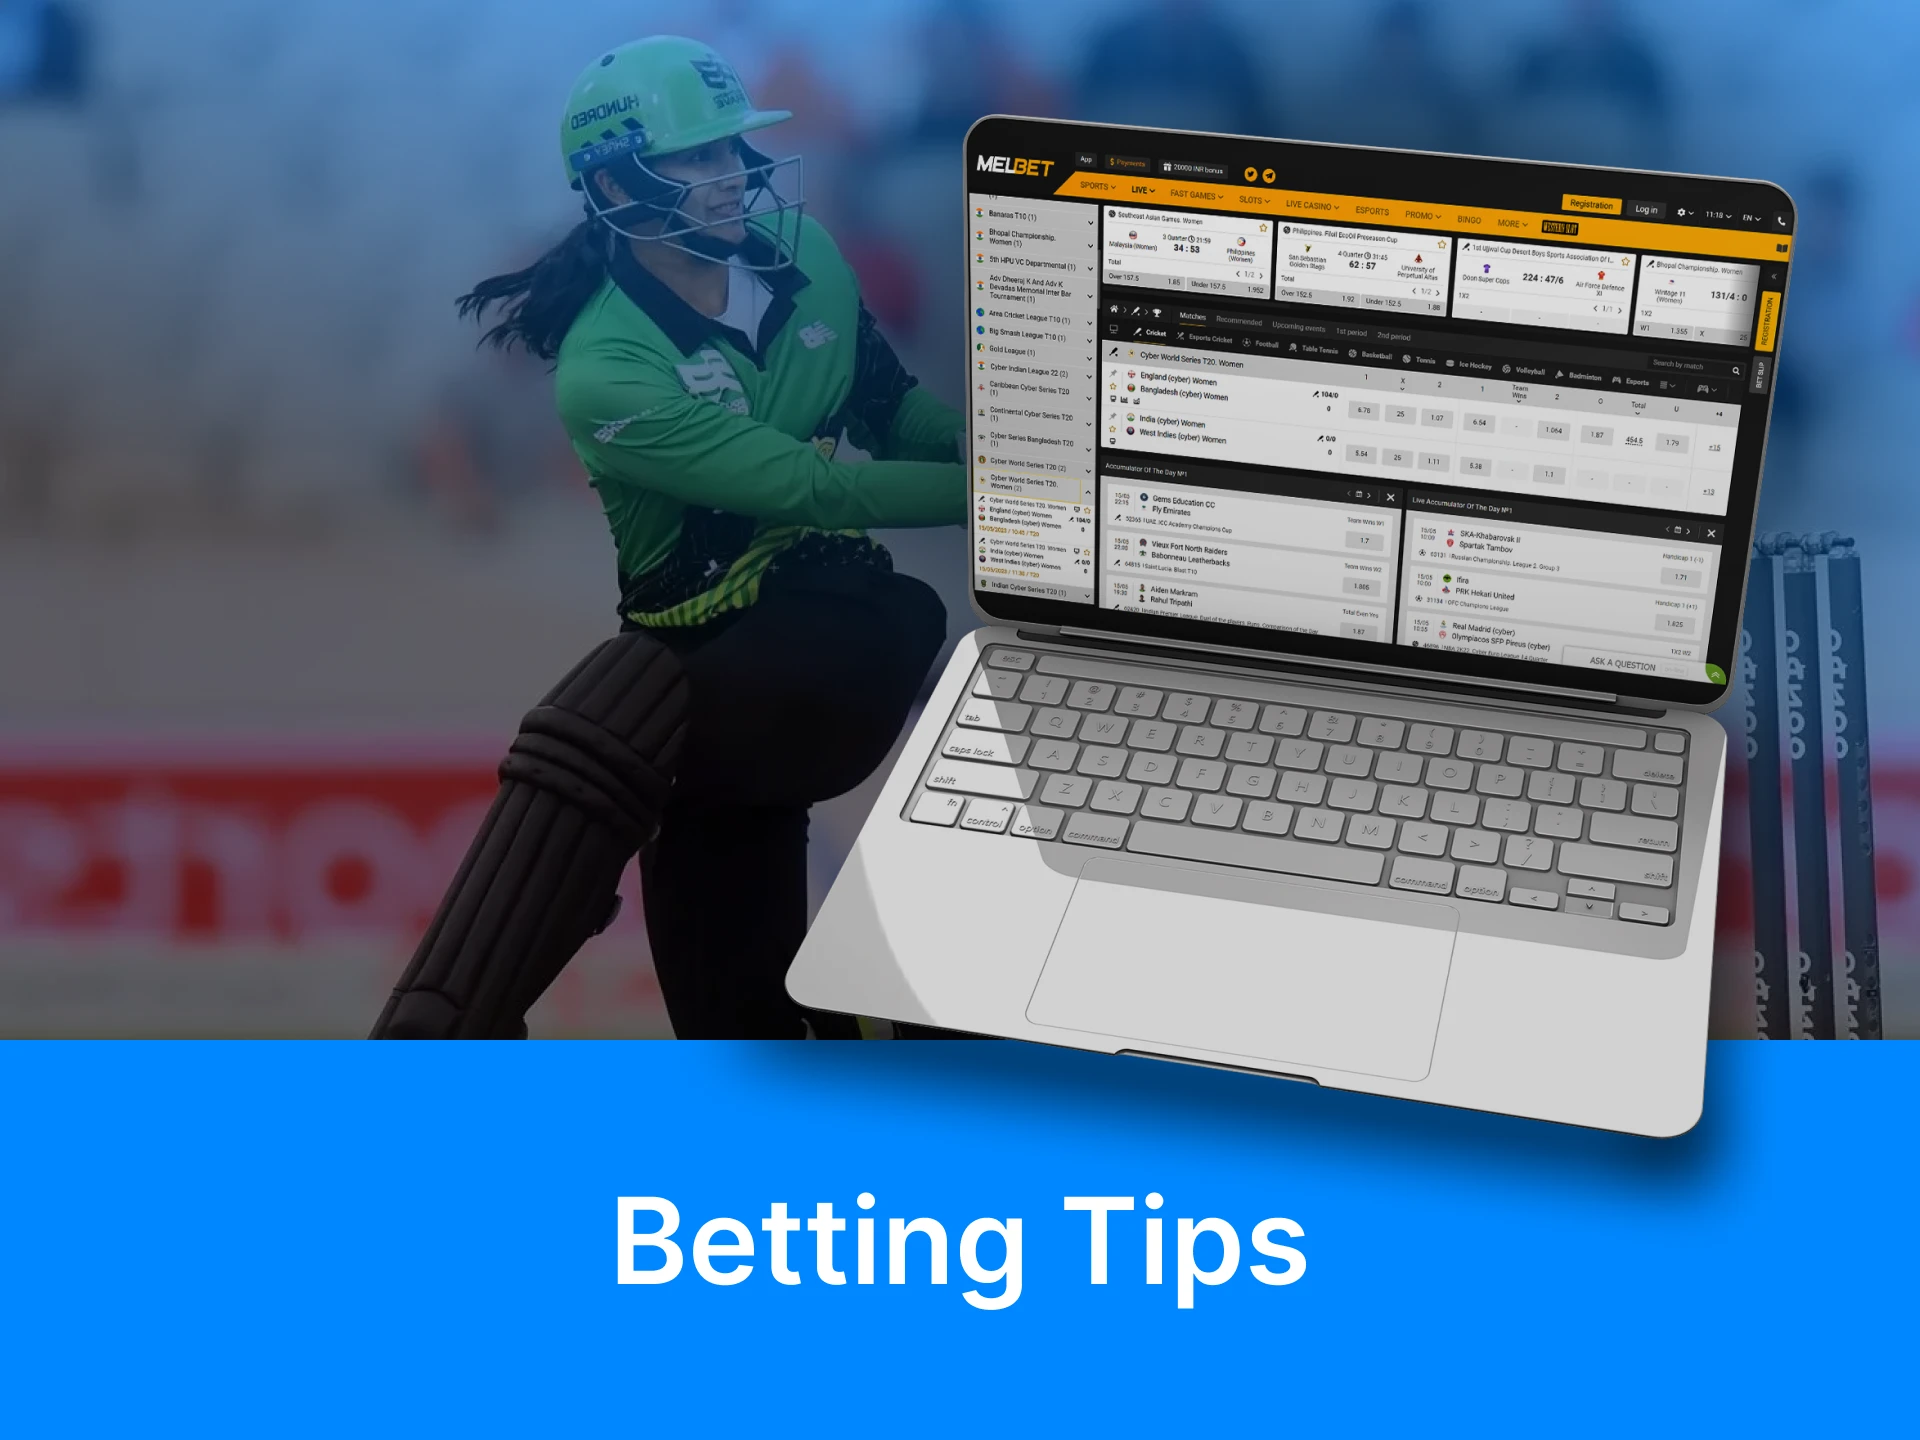 Make your The Hundred bet using special tips.